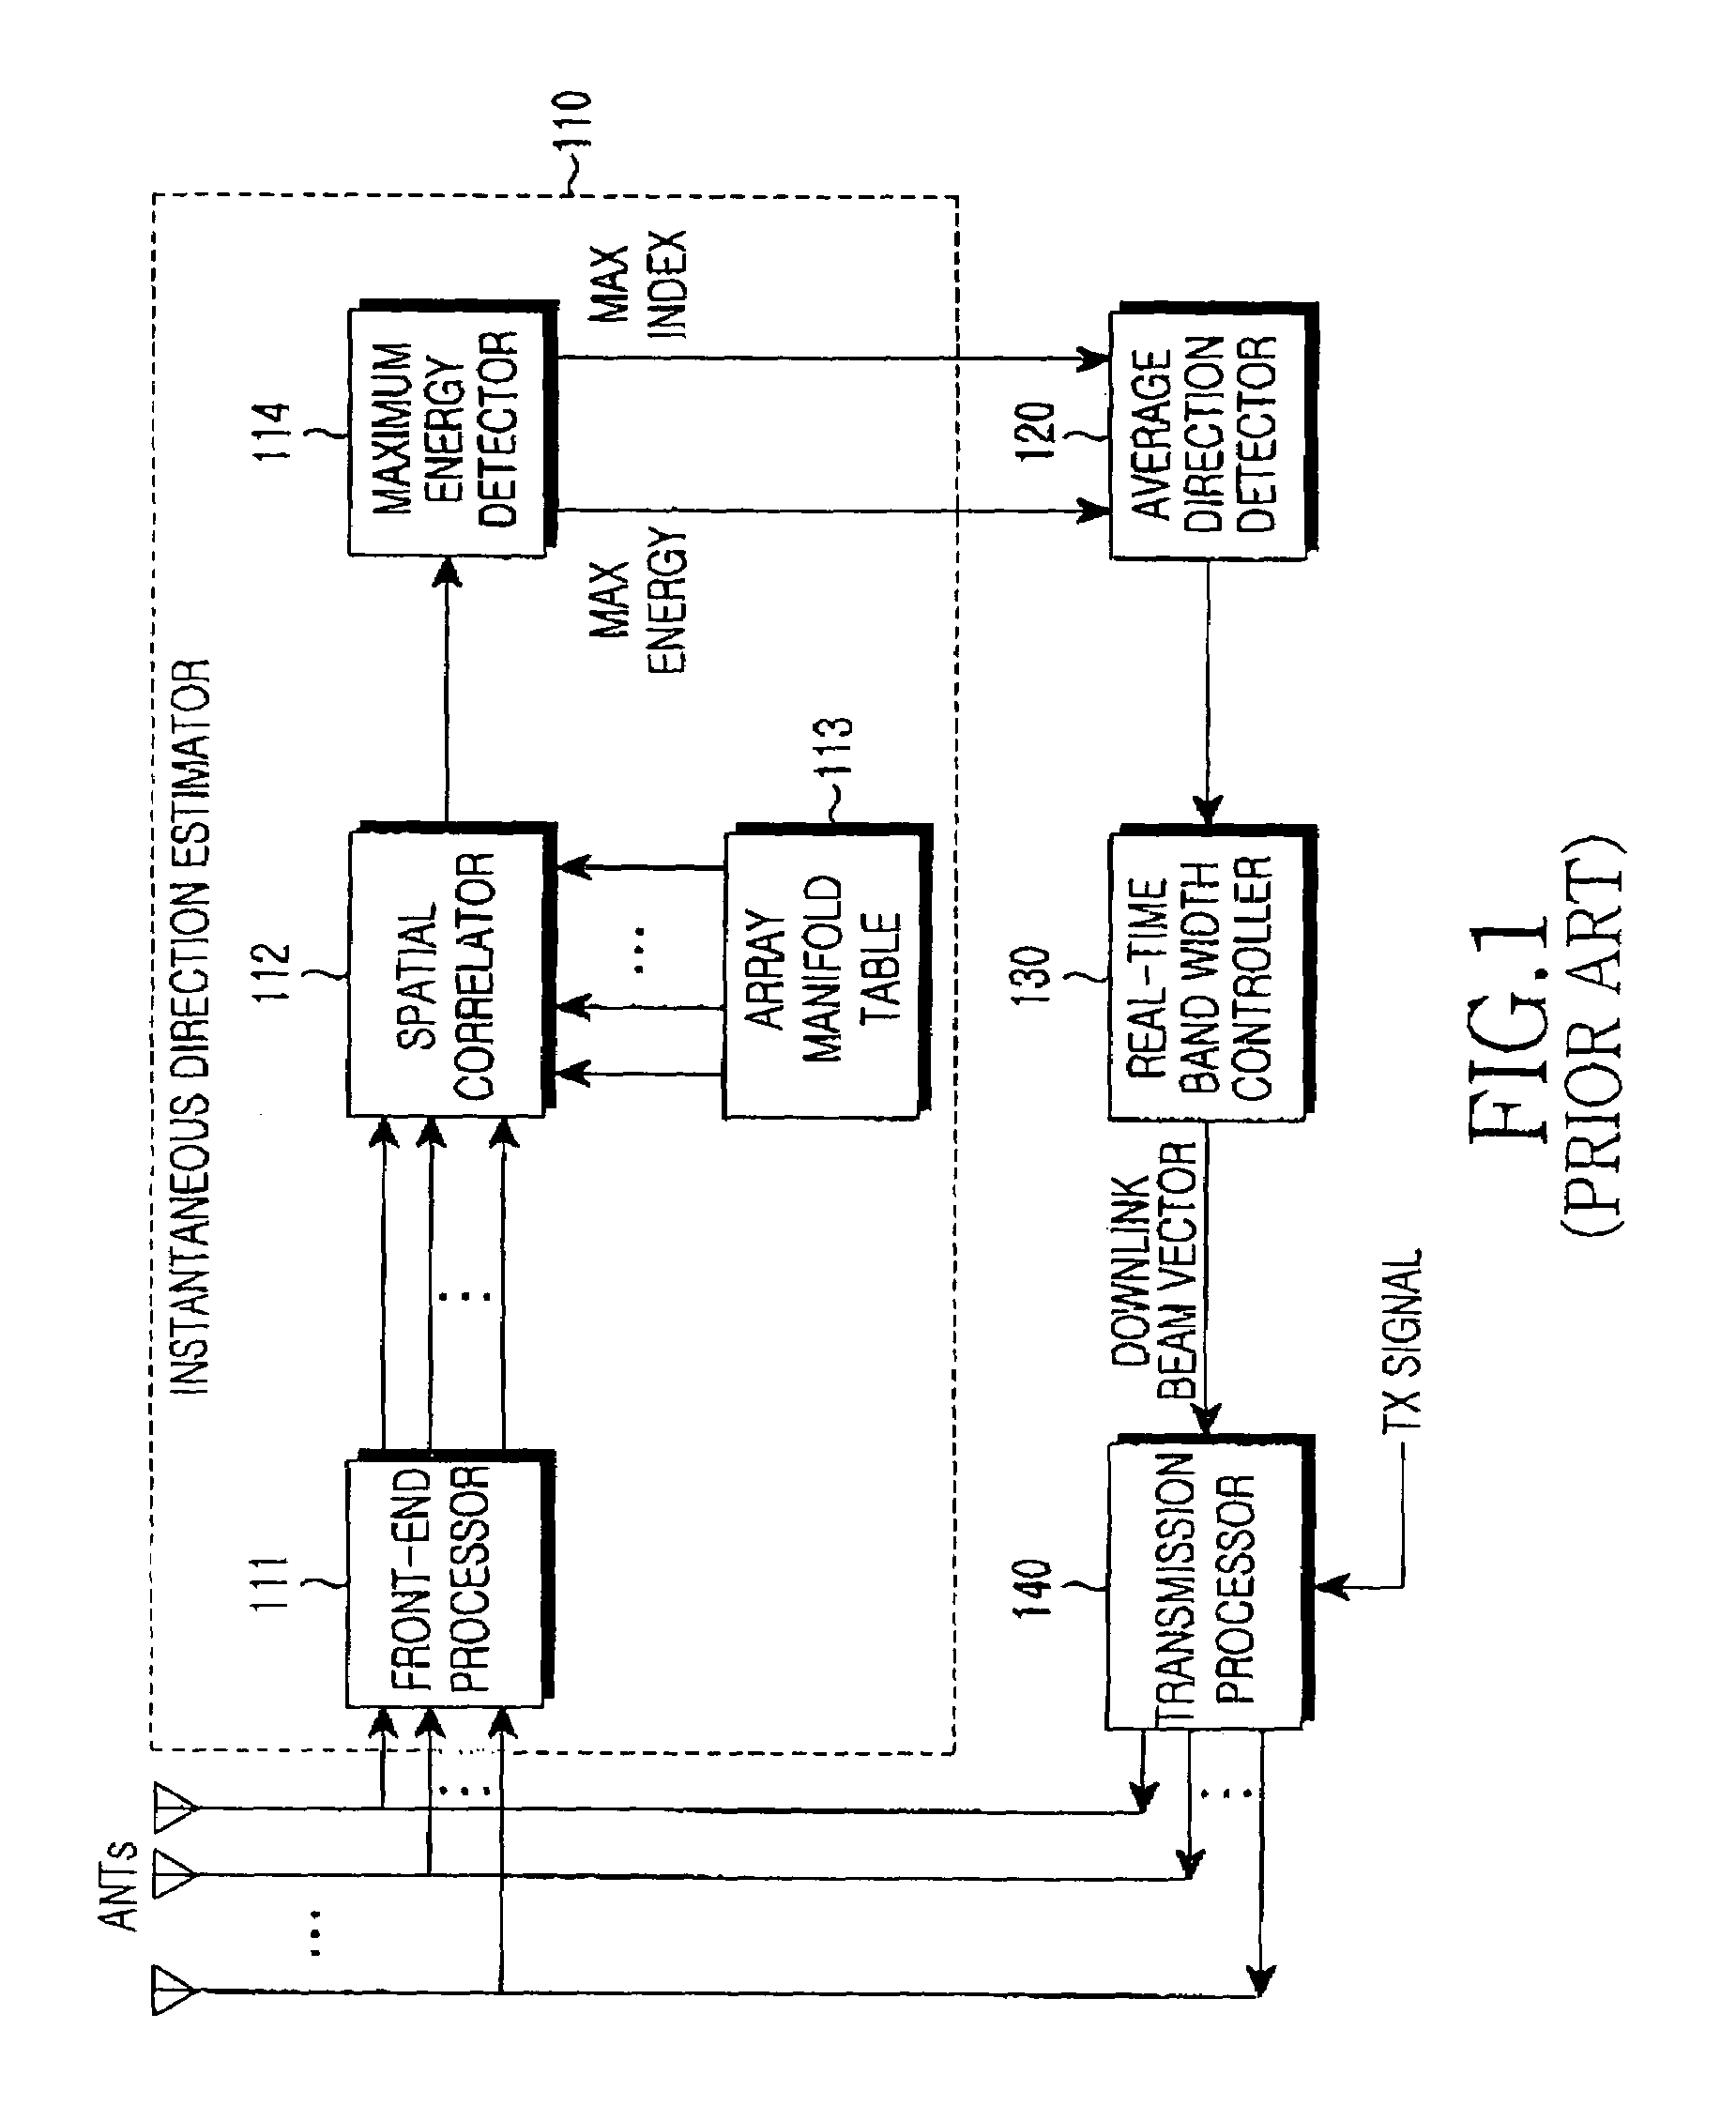 Apparatus and method for forming downlink beam in a smart antenna system